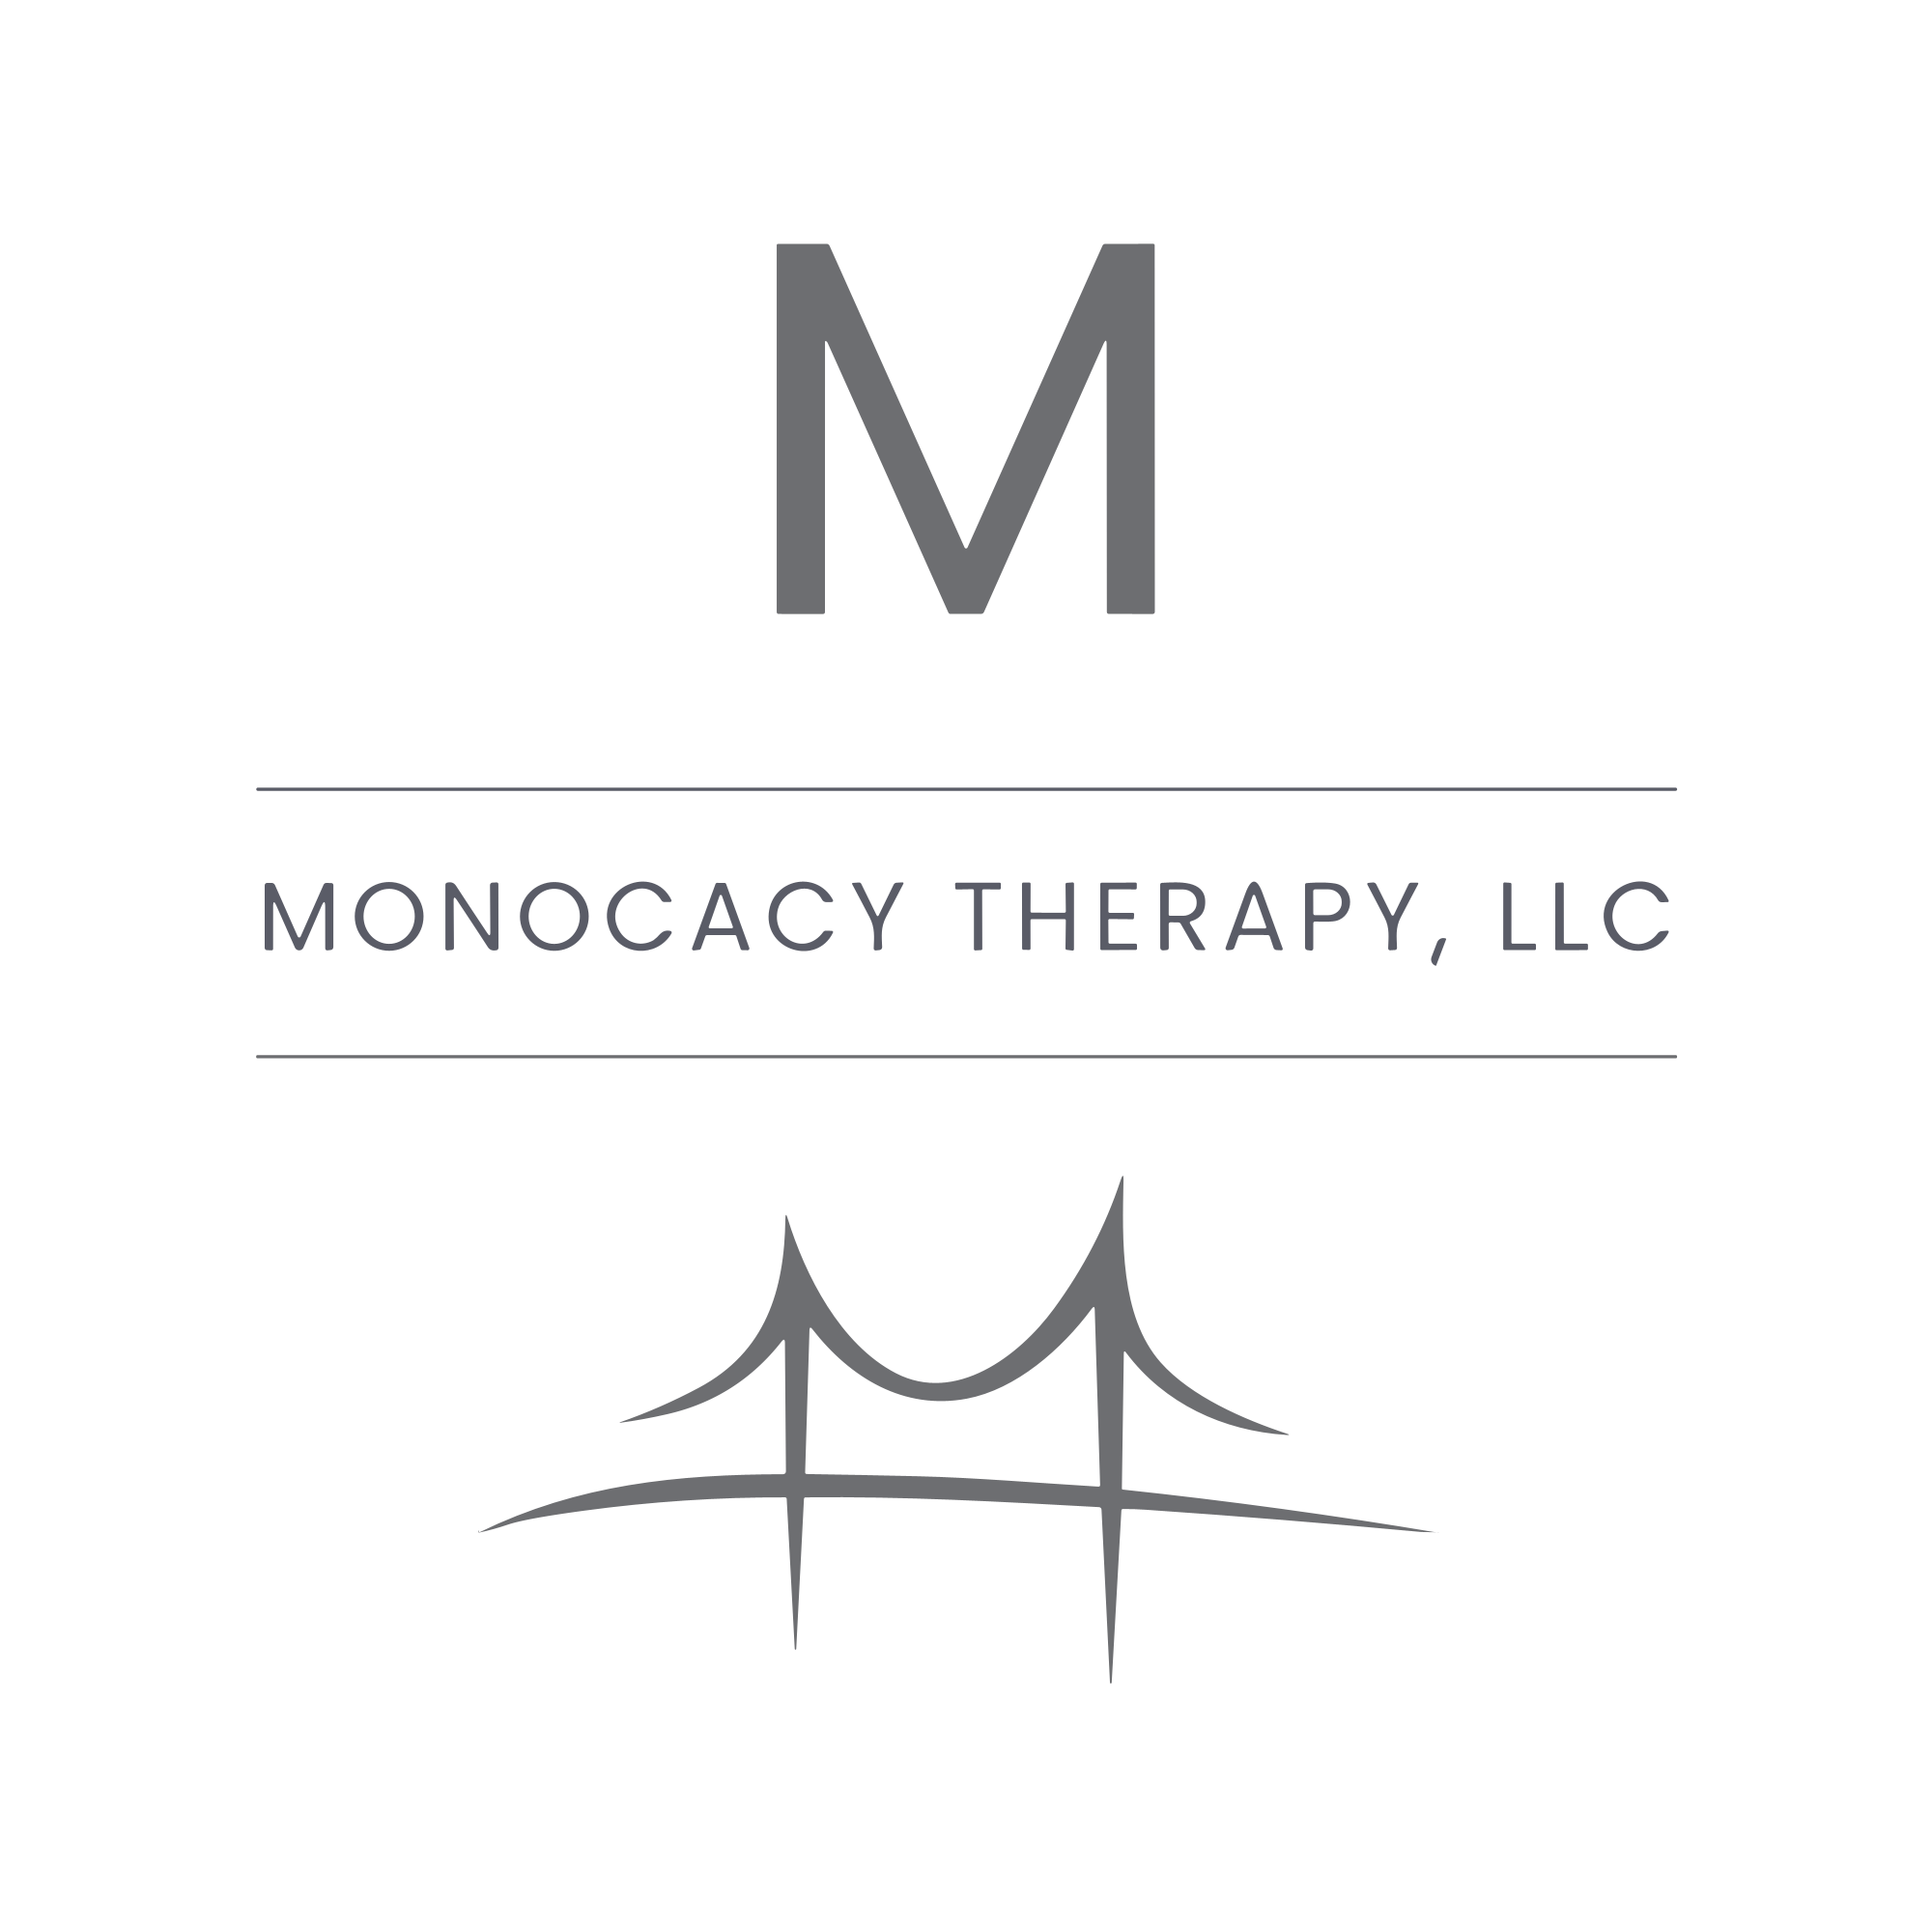 Monocacy Therapy, LLC